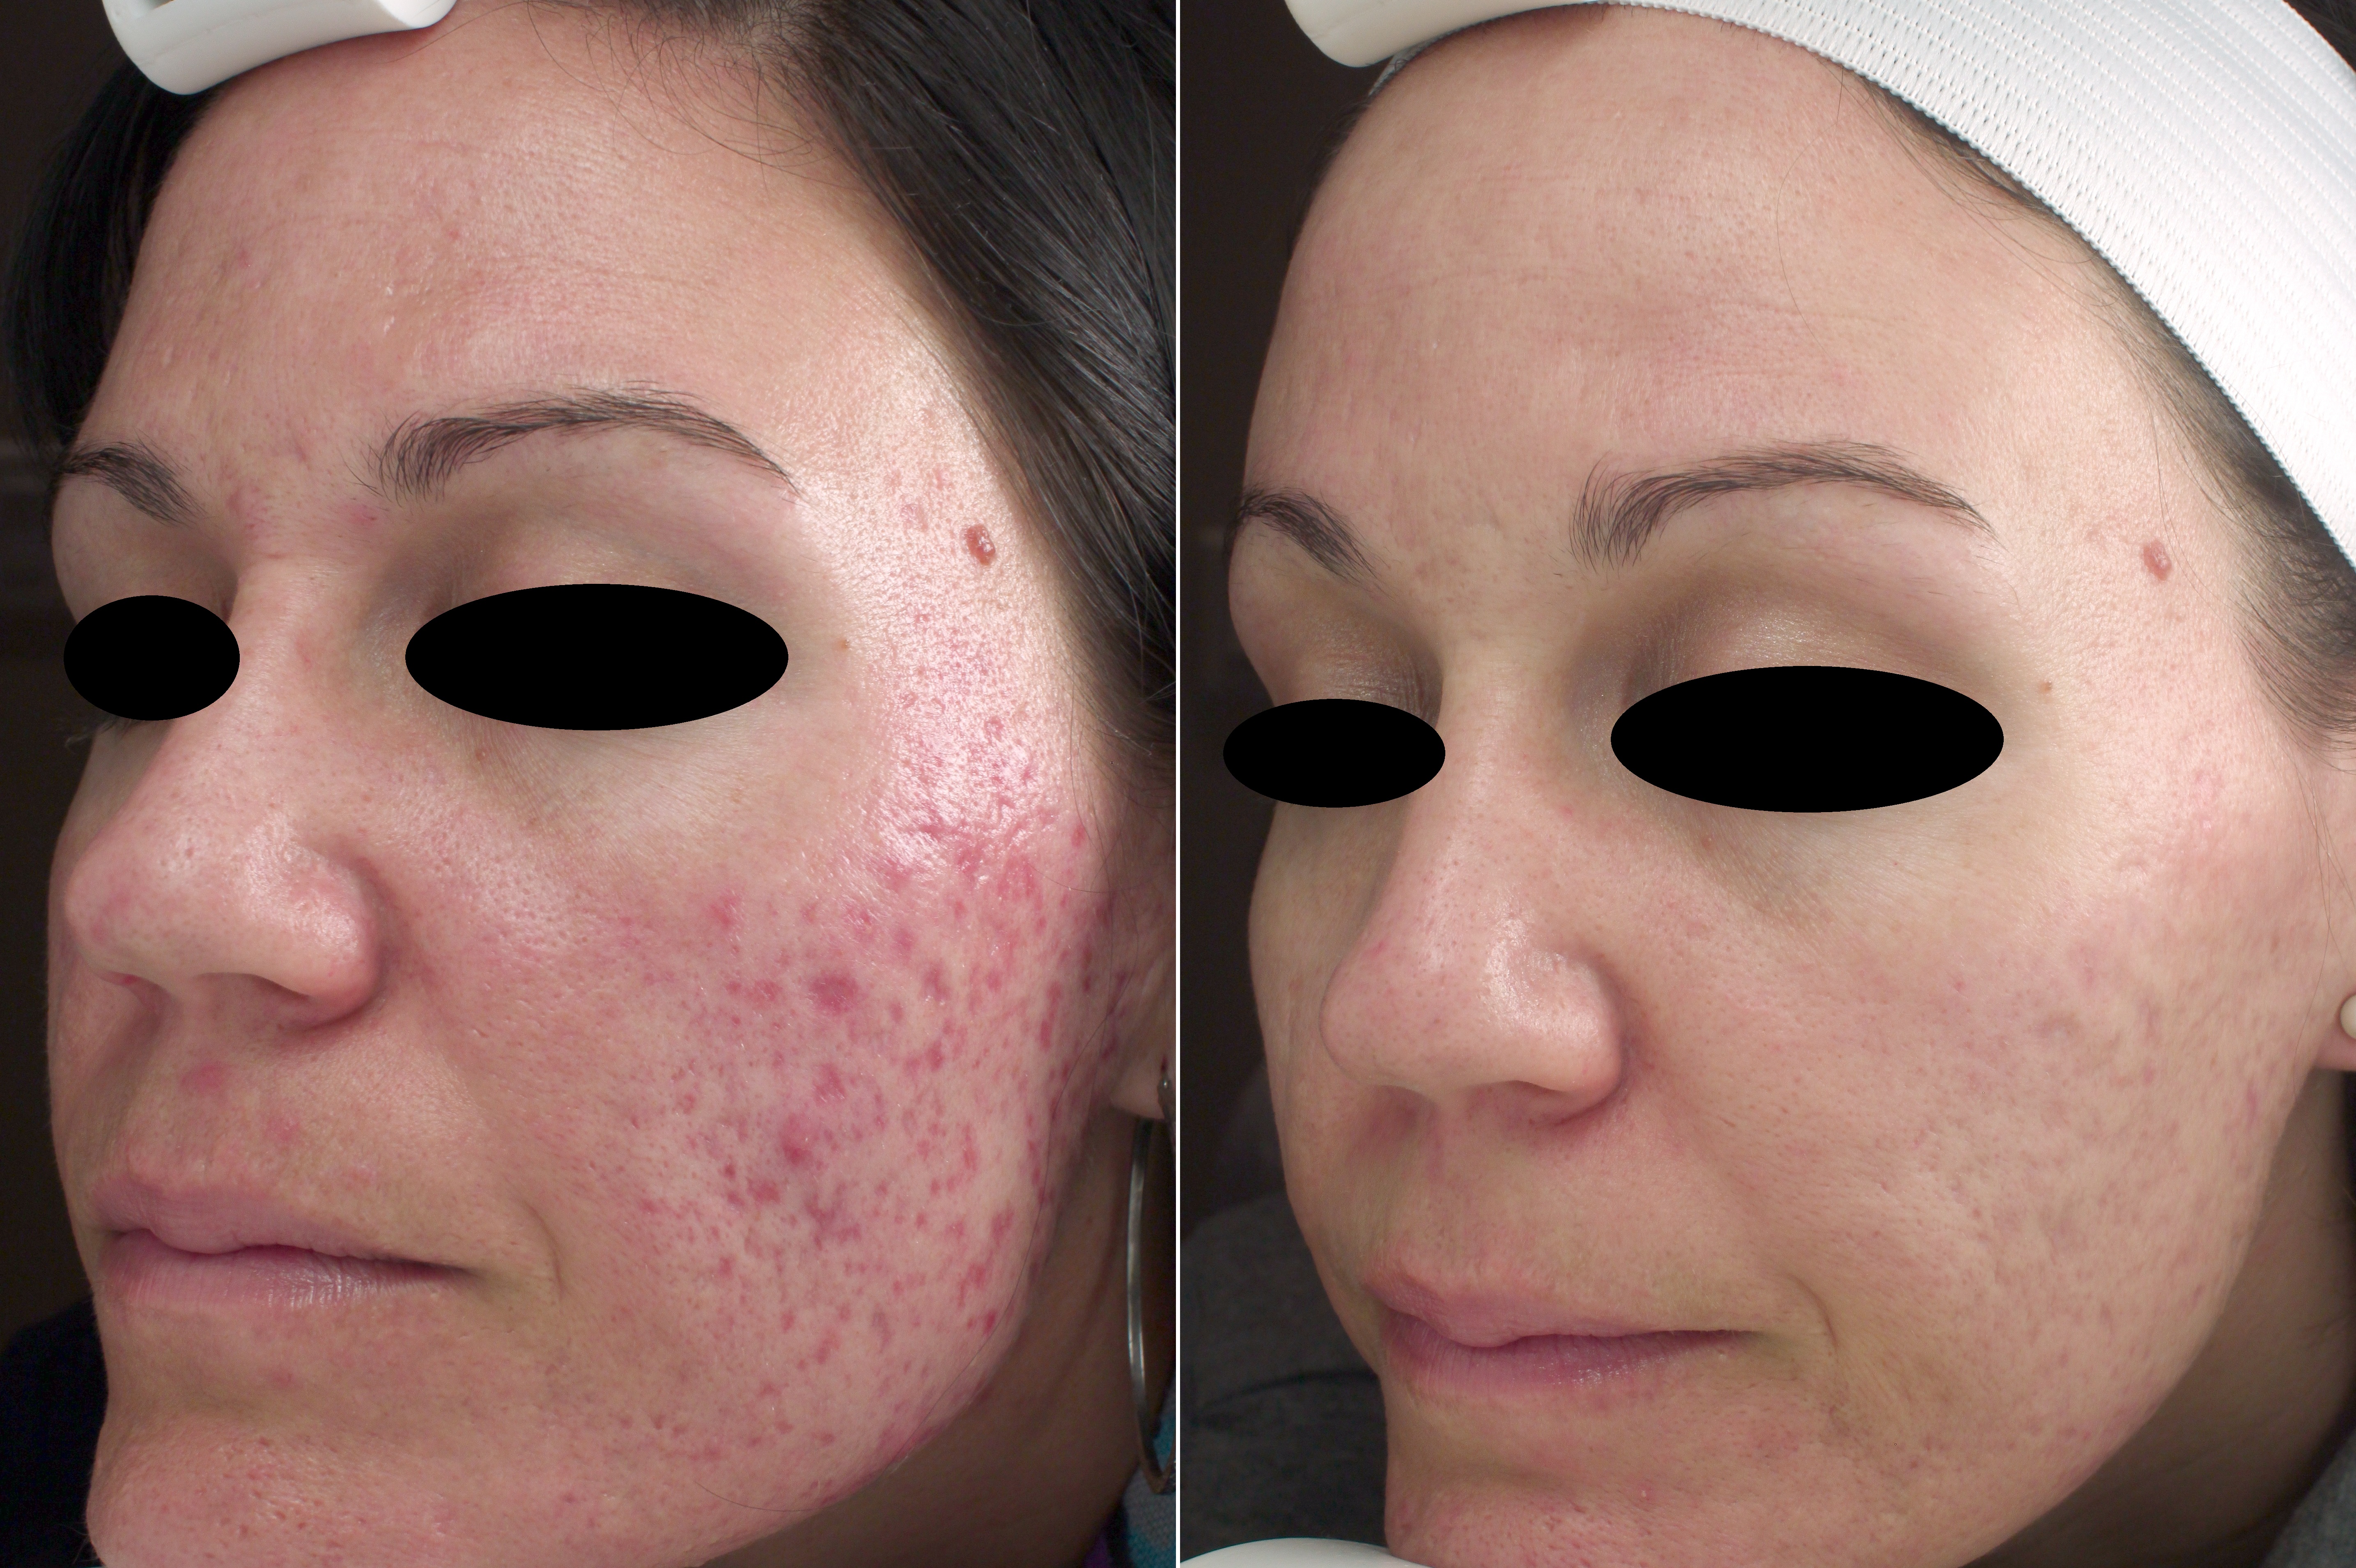 acne scarring treatment with laser at DermaSpa Ajax Pickering